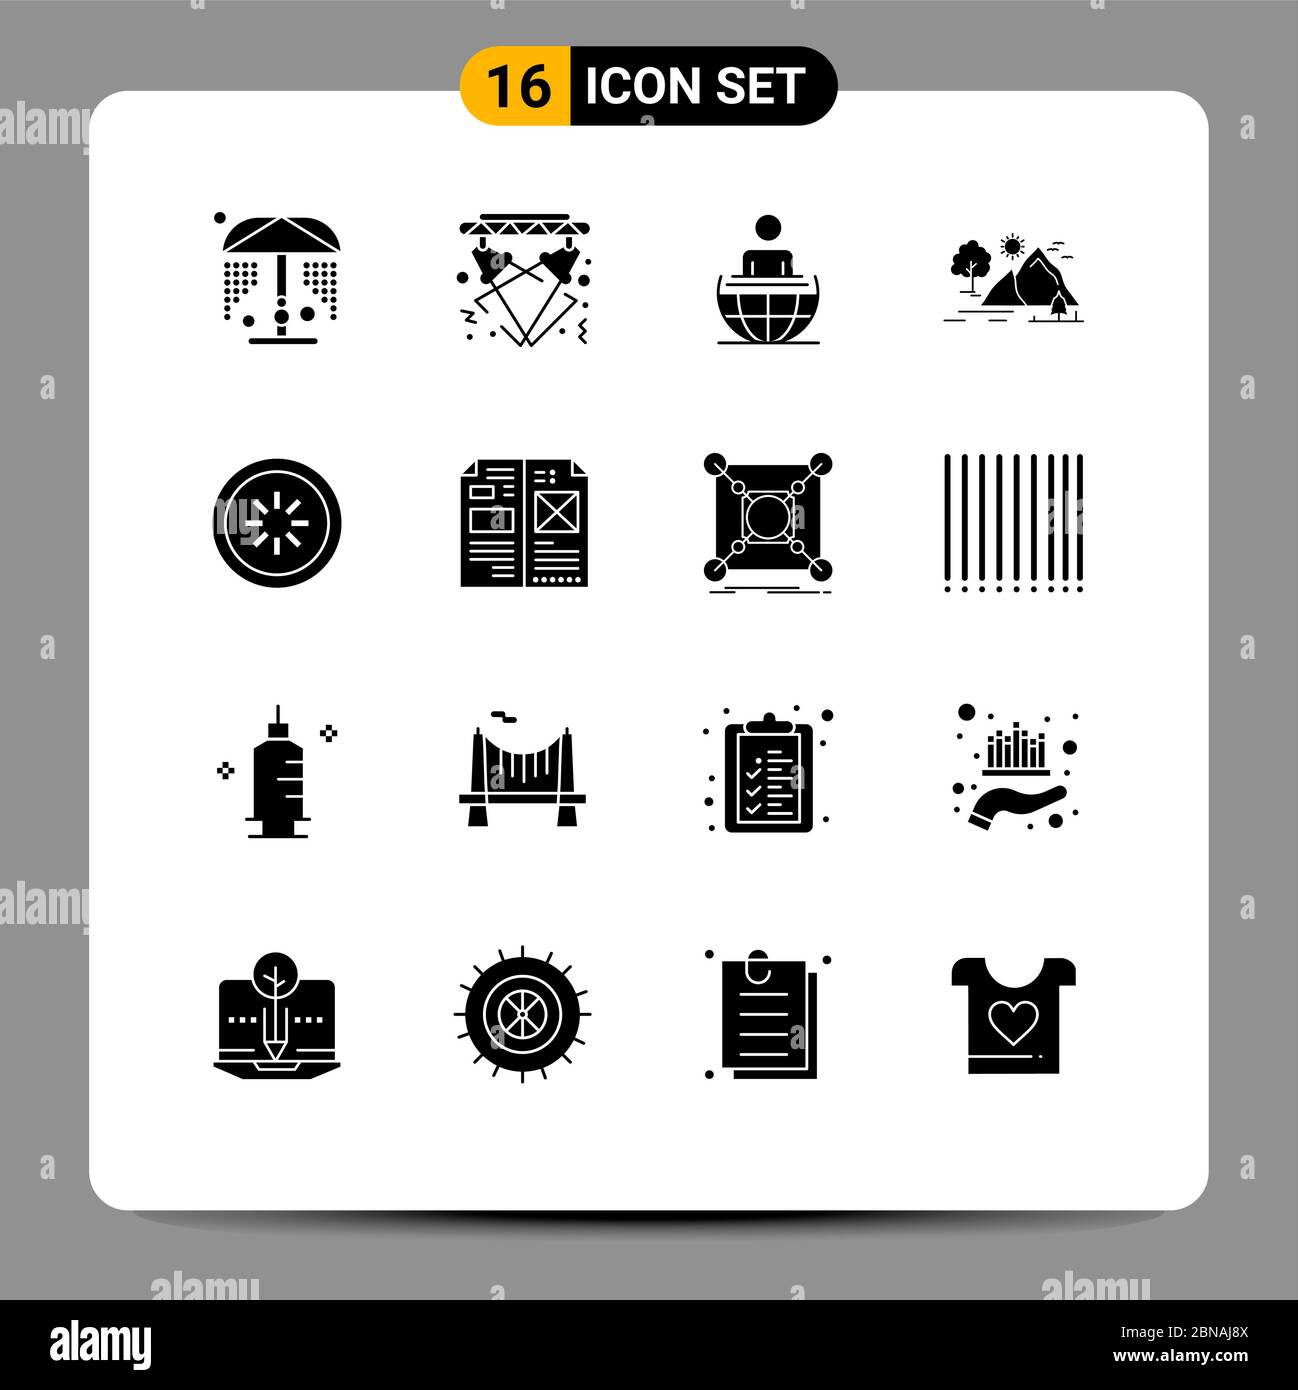 Mobile Interface Solid Glyph Set of 16 Pictograms of buffer, mountain, global process, nature, hill Editable Vector Design Elements Stock Vector